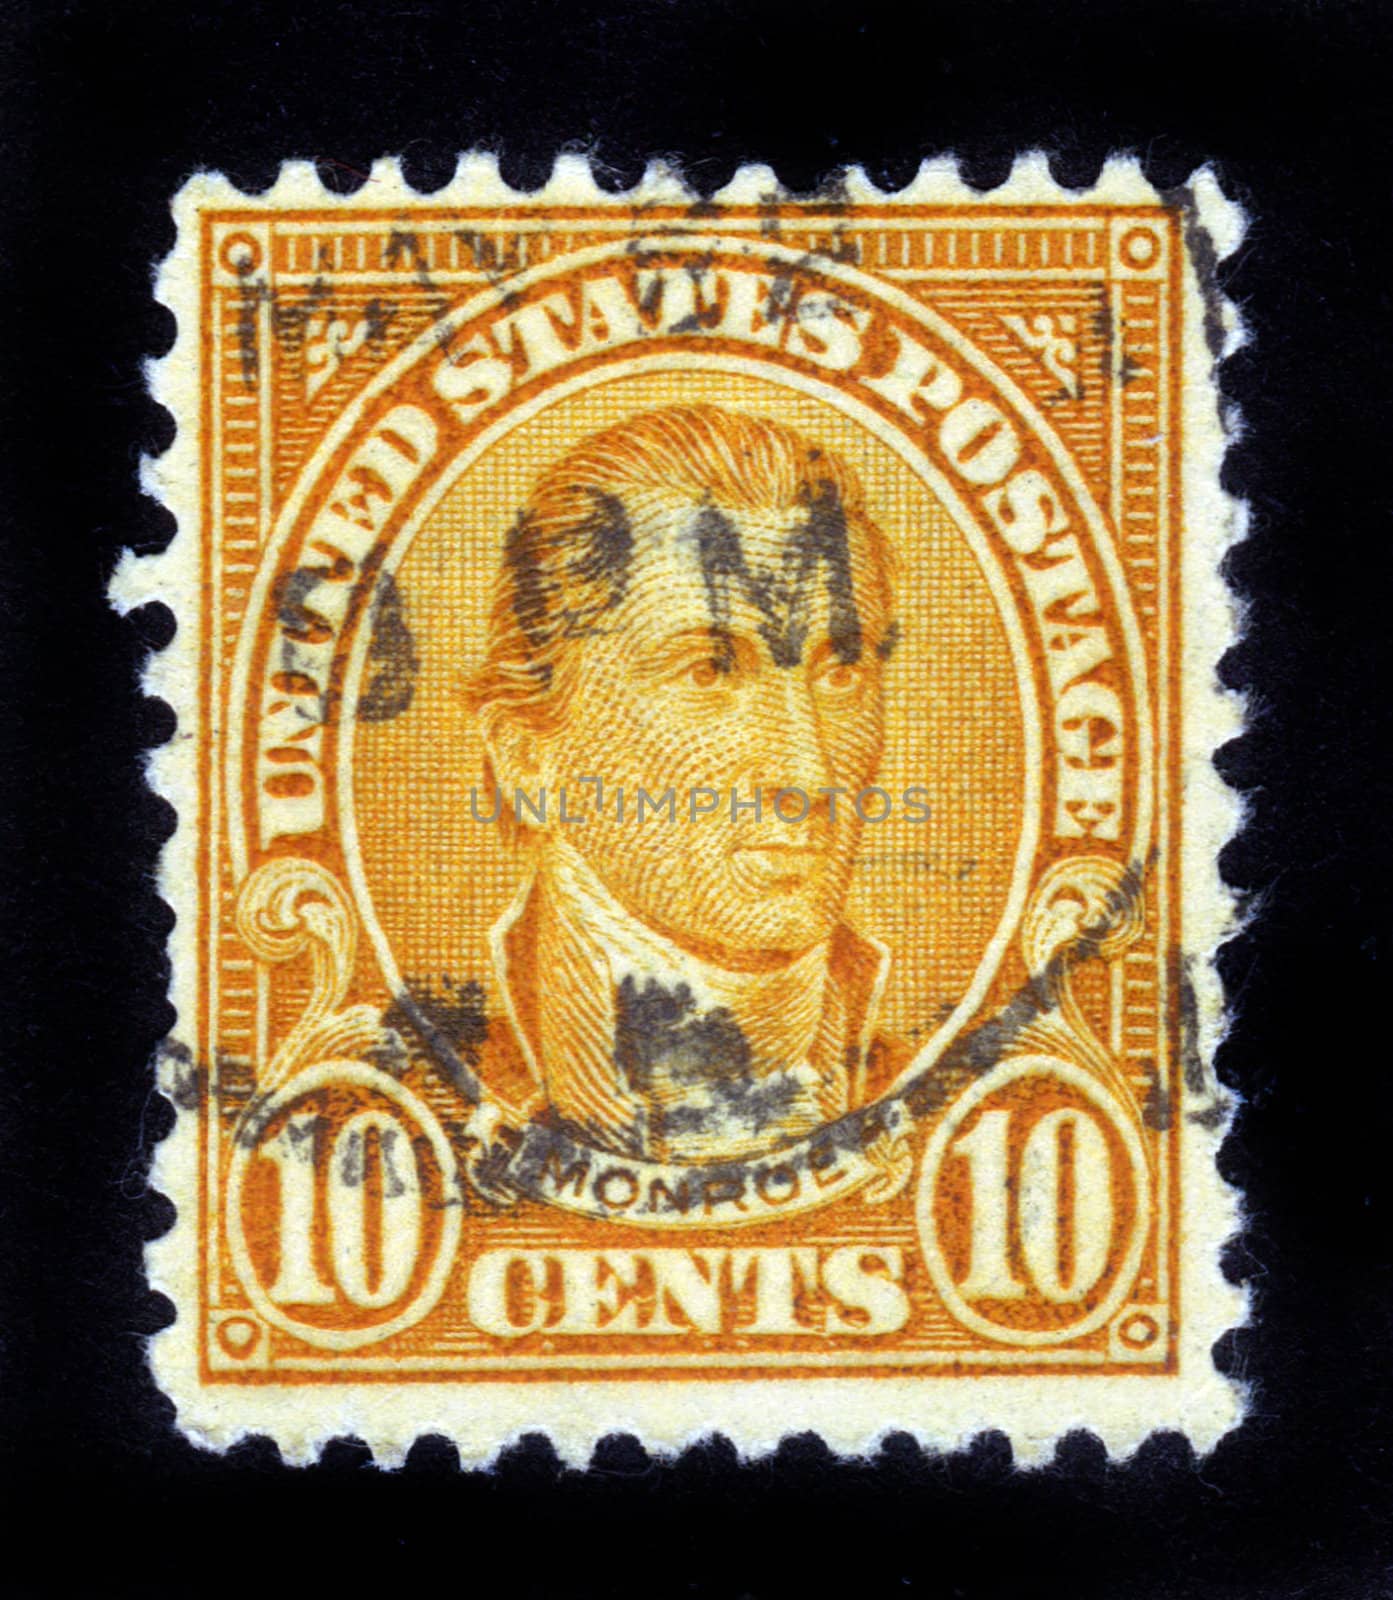 UNITED STATES OF AMERICA - CIRCA 1932: A stamp printed in the USA shows image of President James Monroe, circa 1932